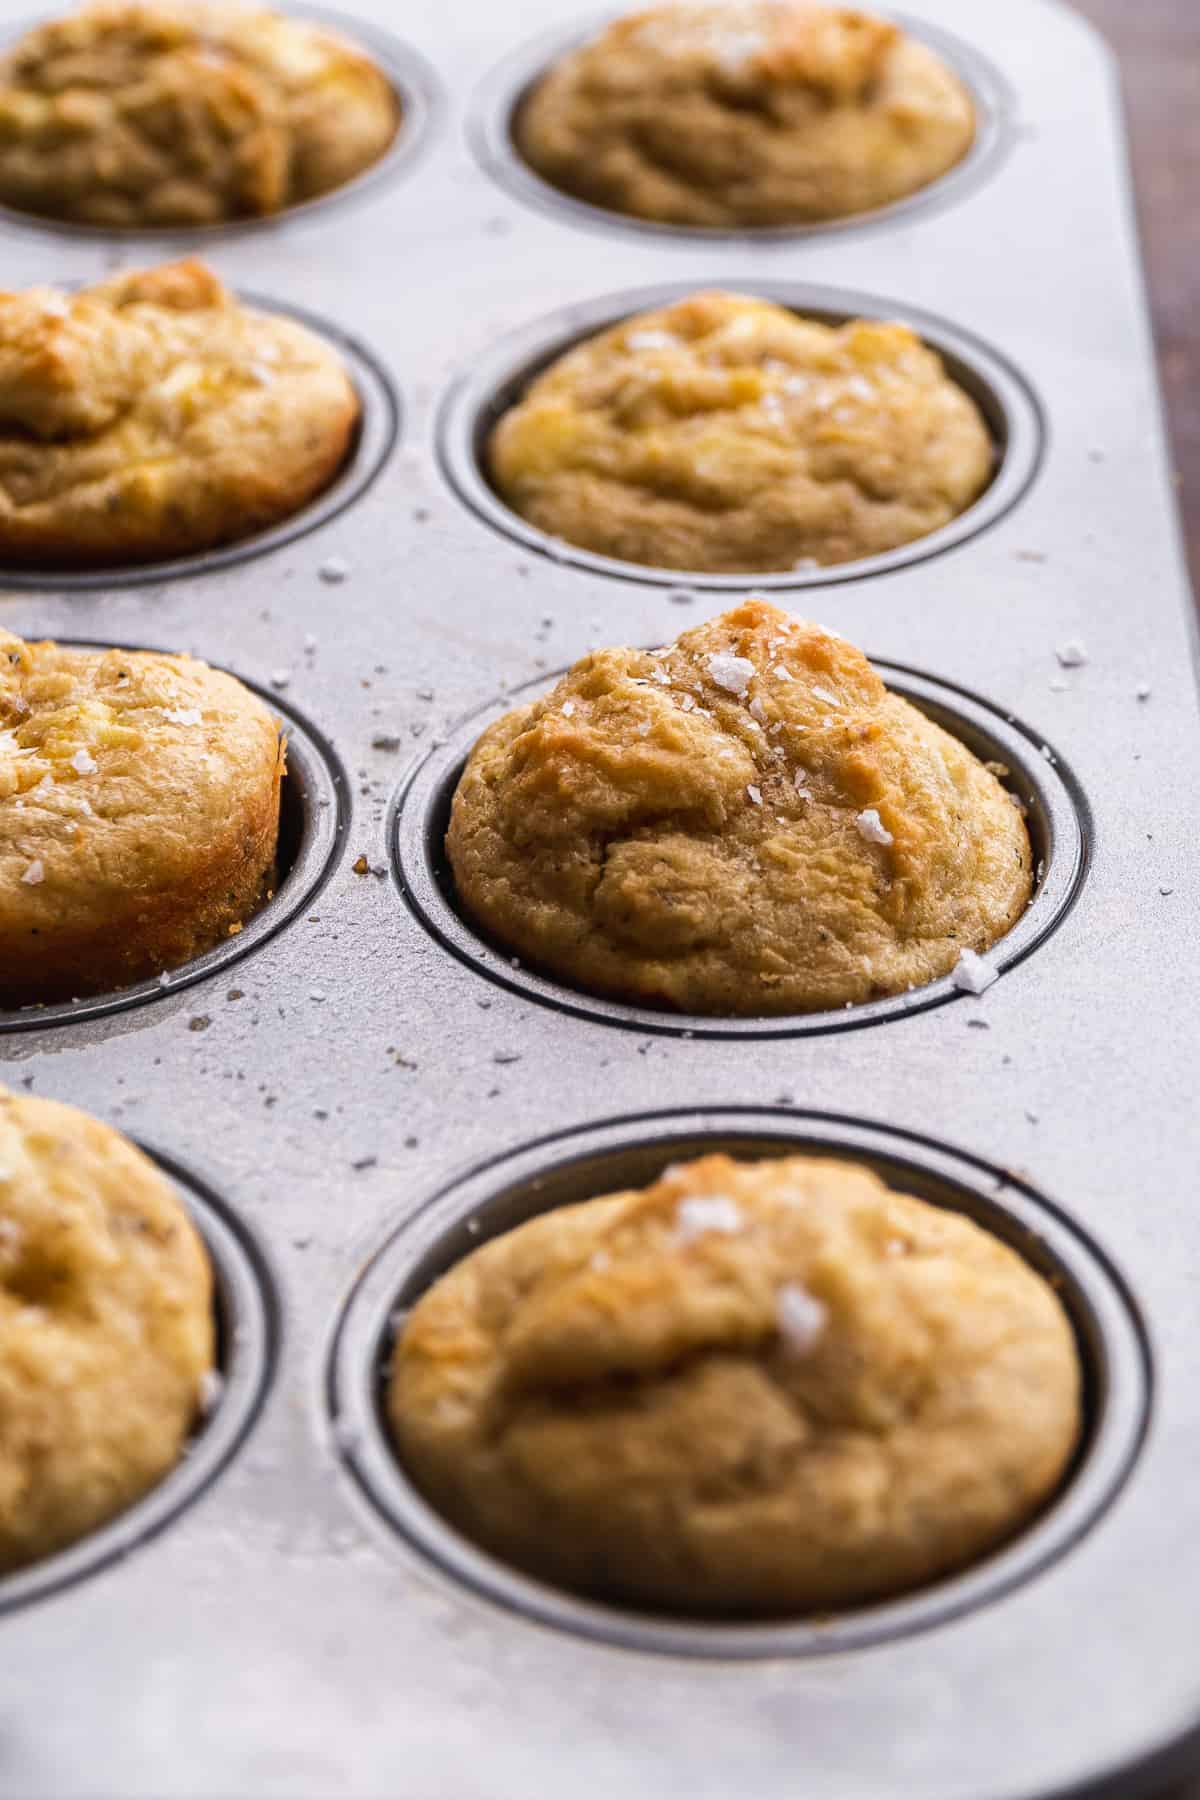 Goat cheese muffins baked in a muffin tin.